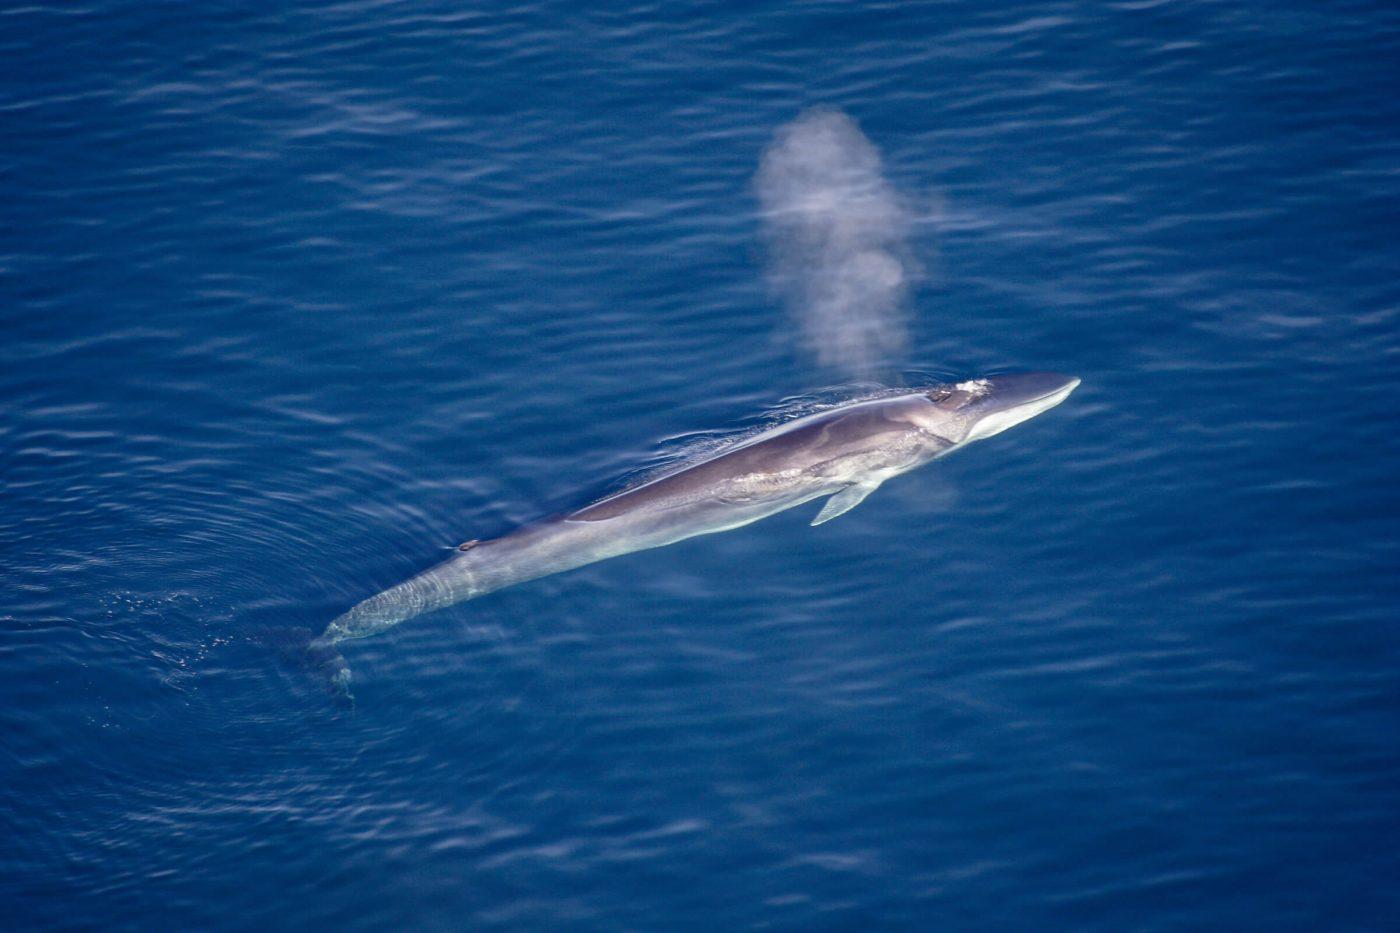 Fin whale breathing. Photo by Aqqa Rosing Asvid.